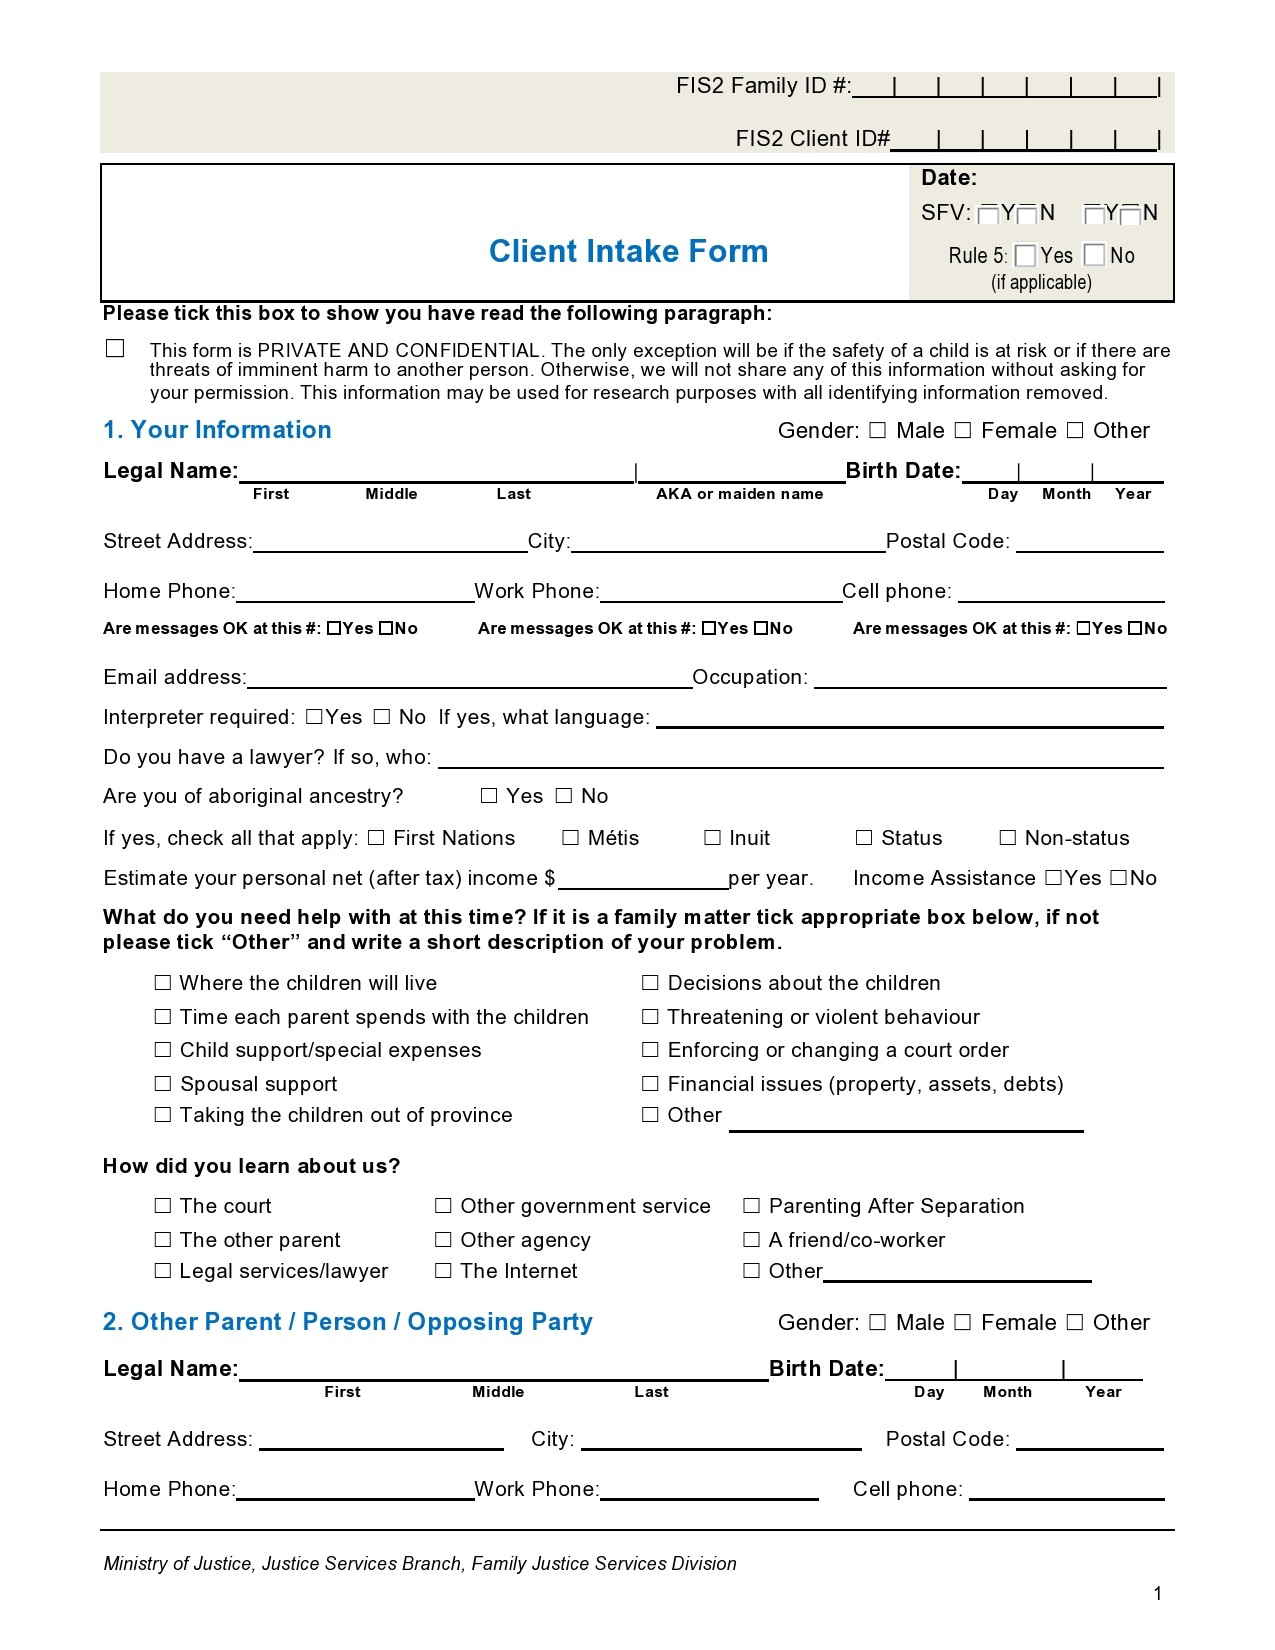 42 Printable Client Intake Forms (FREE Templates) ᐅ TemplateLab